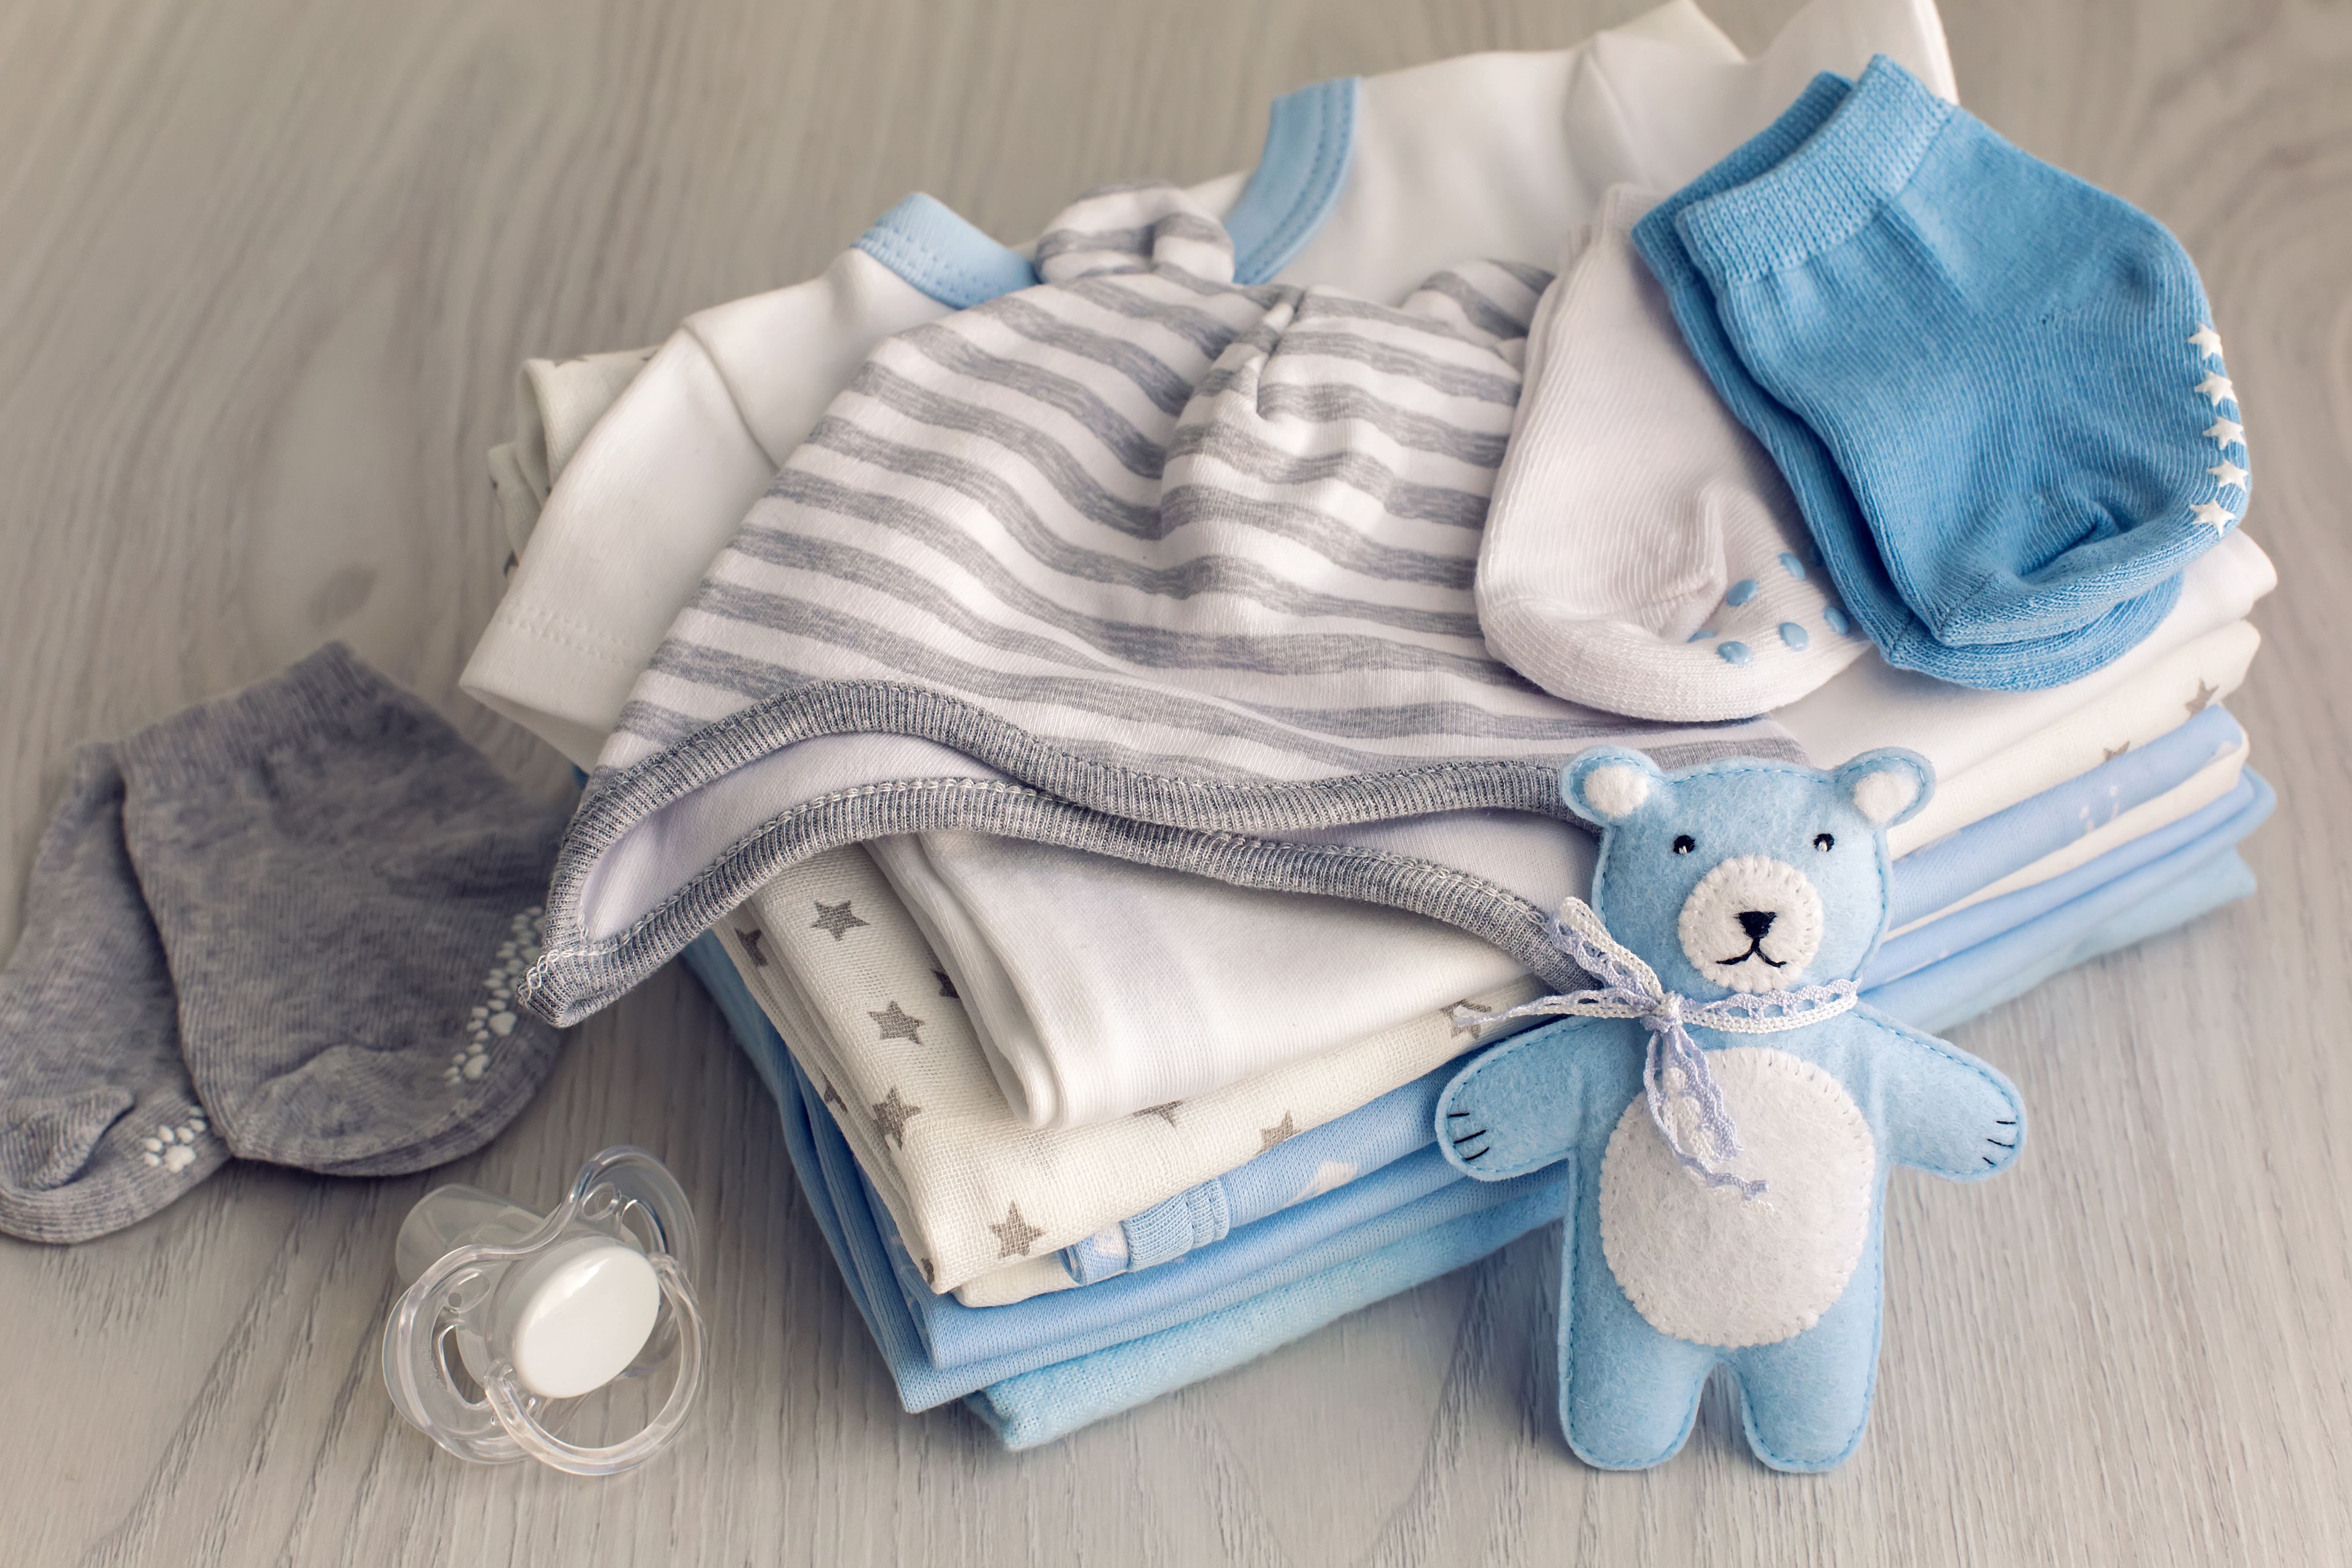 Stack of baby clothing and toys.jpg